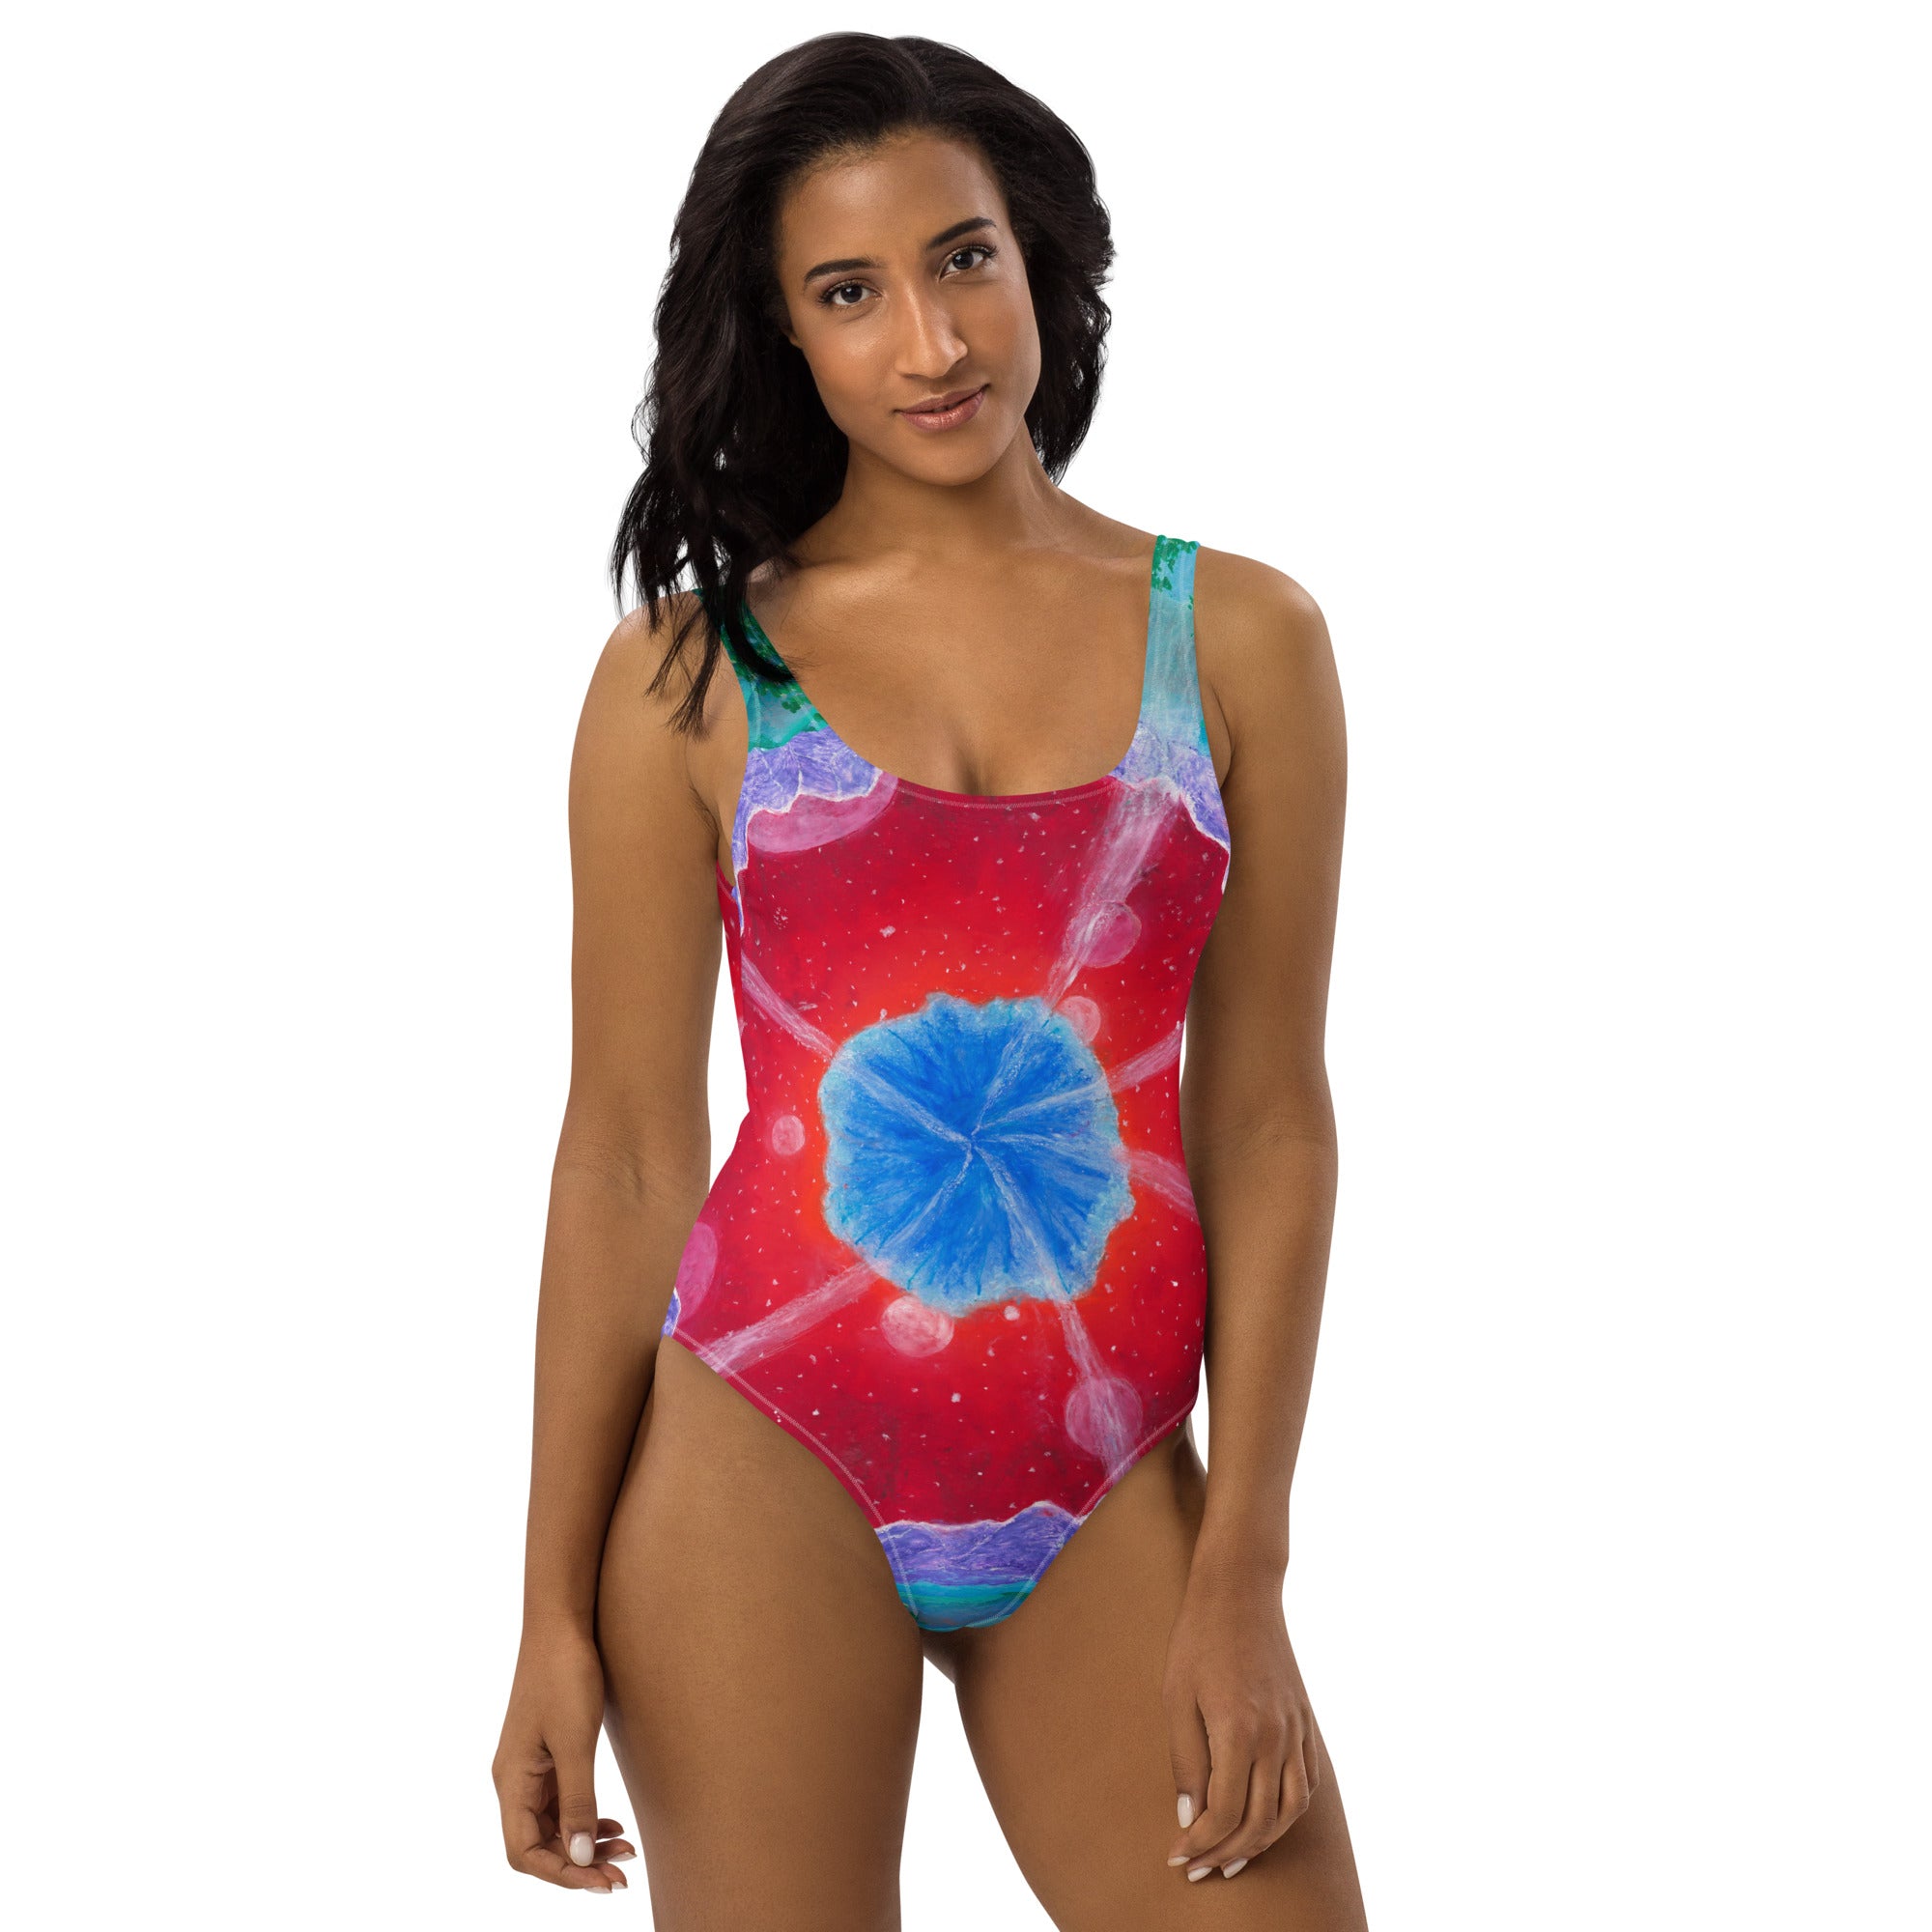 Morninglorious One-Piece Swimsuit